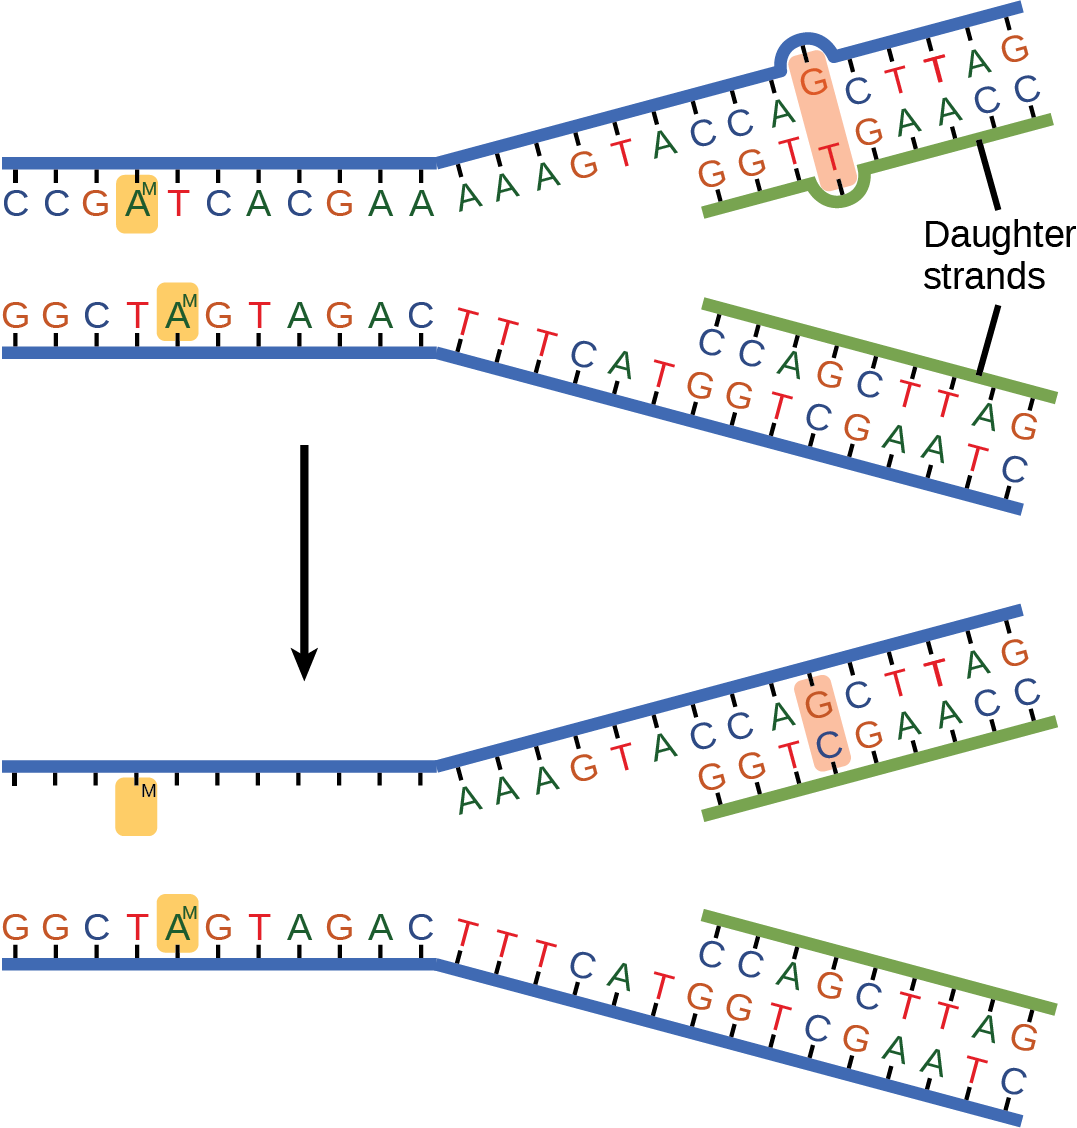 The top illustration shows a replicated D N A strand with G T base mismatch. The bottom illustration shows the repaired D N A, which has the correct G C base pairing.